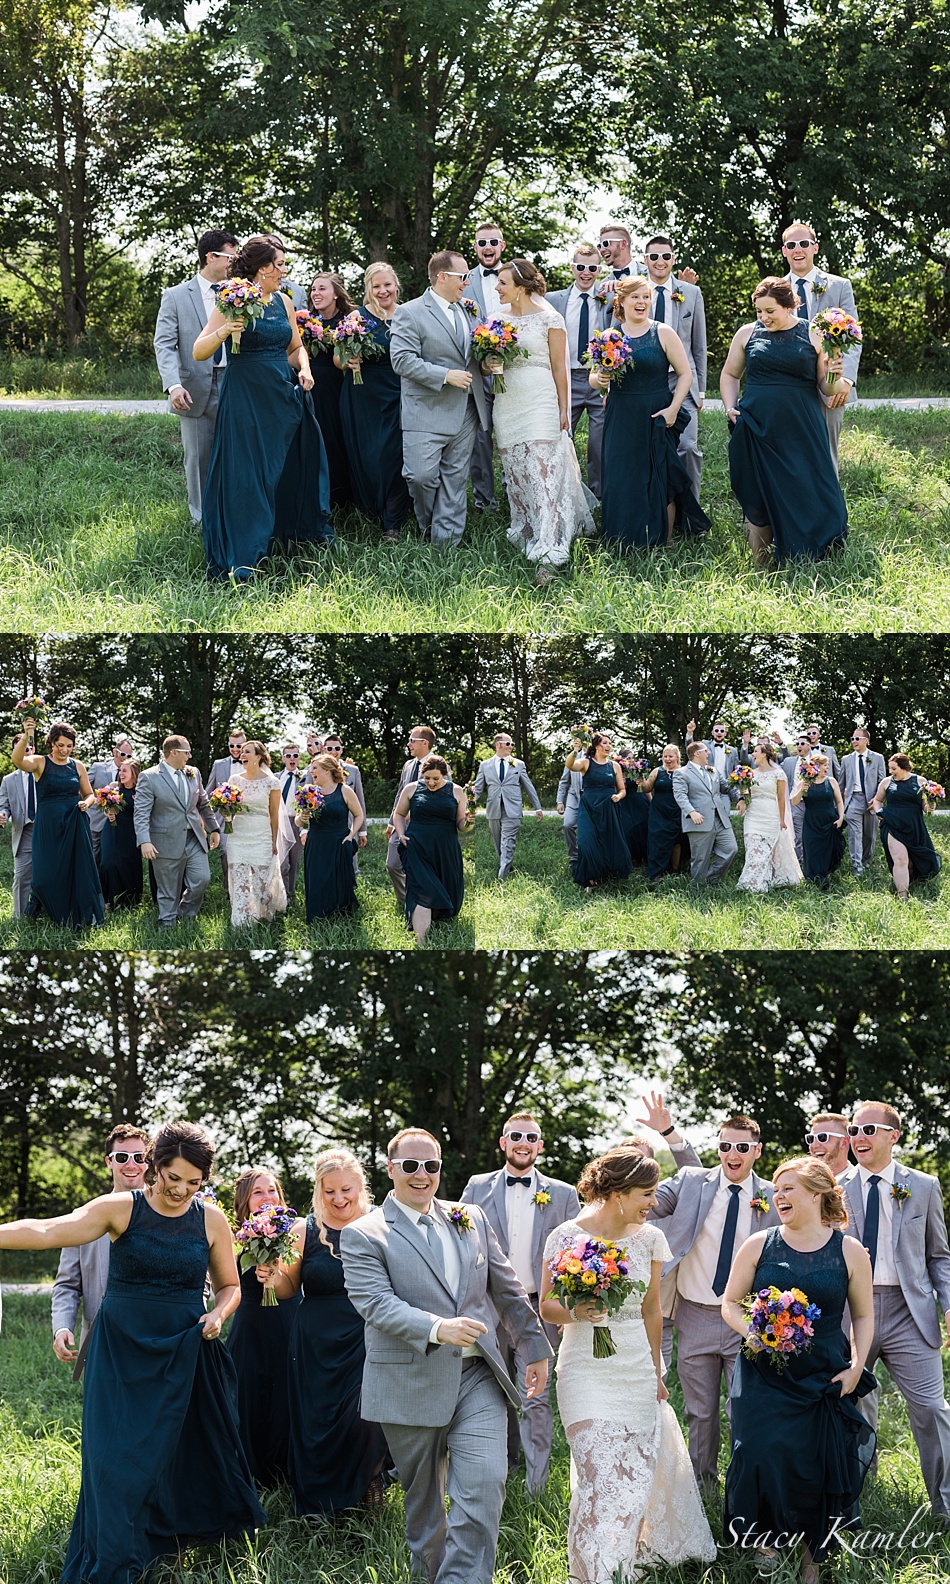 Bridal Party Photos in Roca, Ne with Navy Blue Dresses and Grey Suits